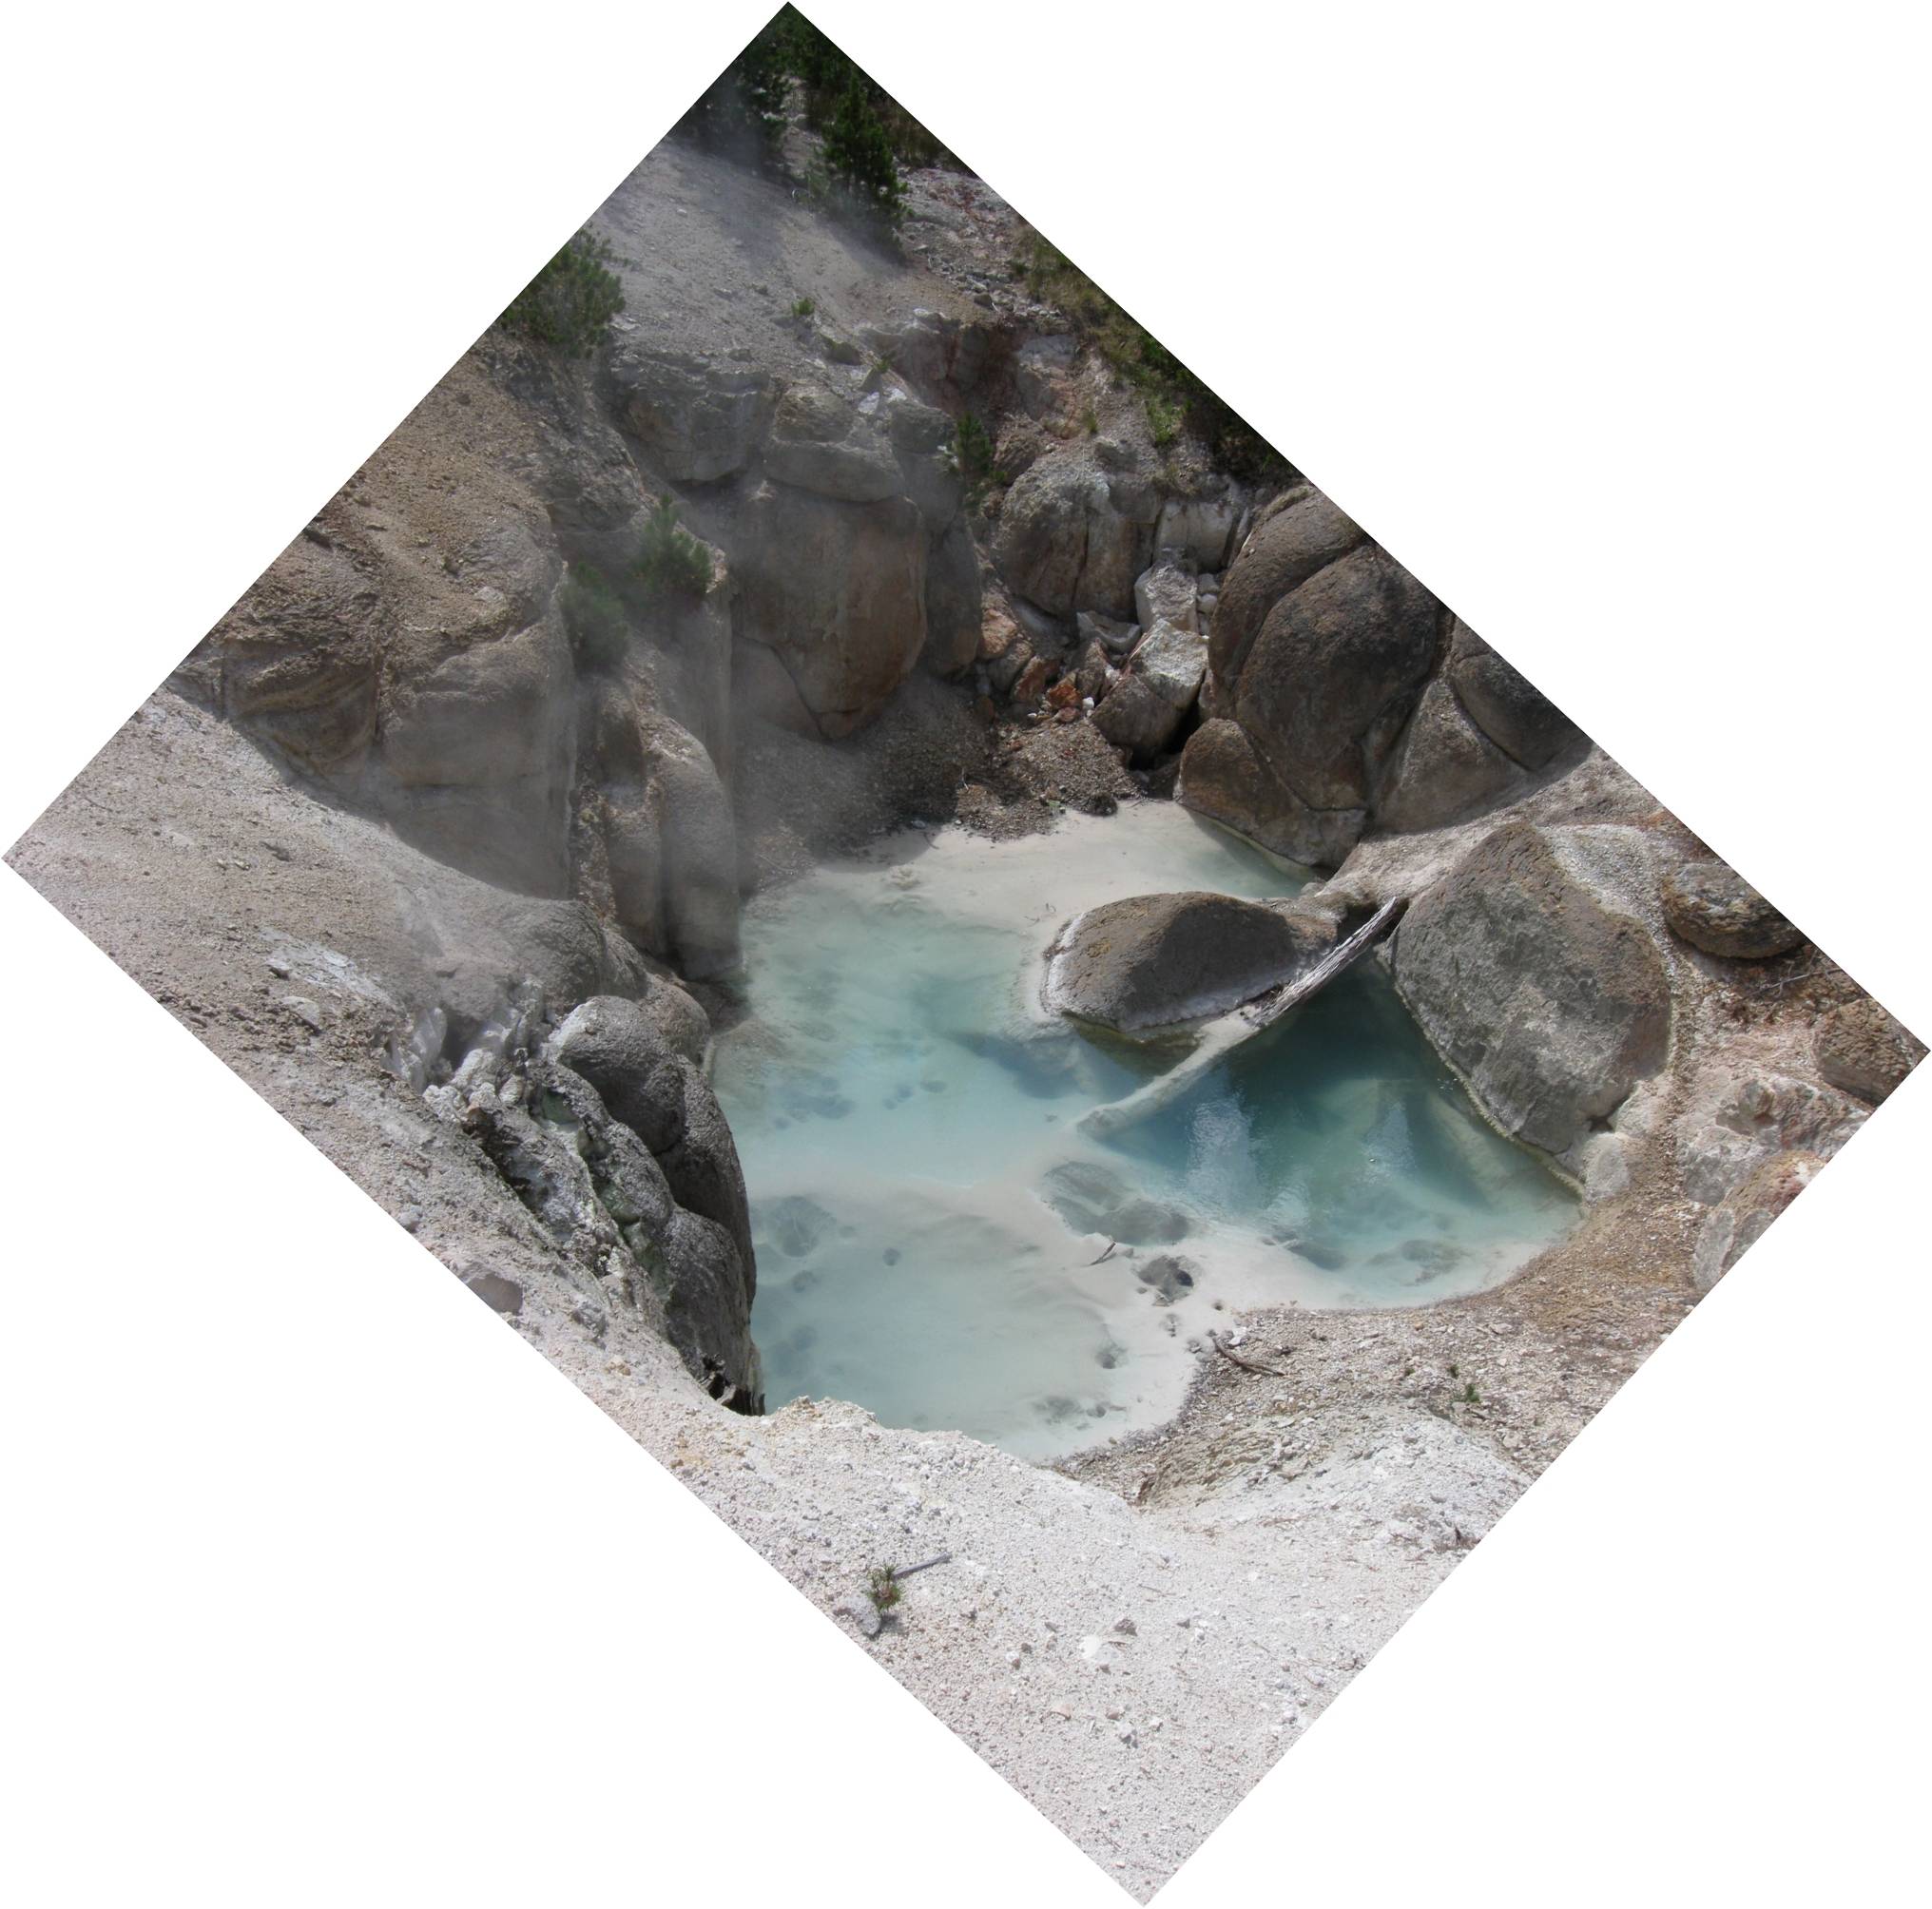 Image: A hot spring